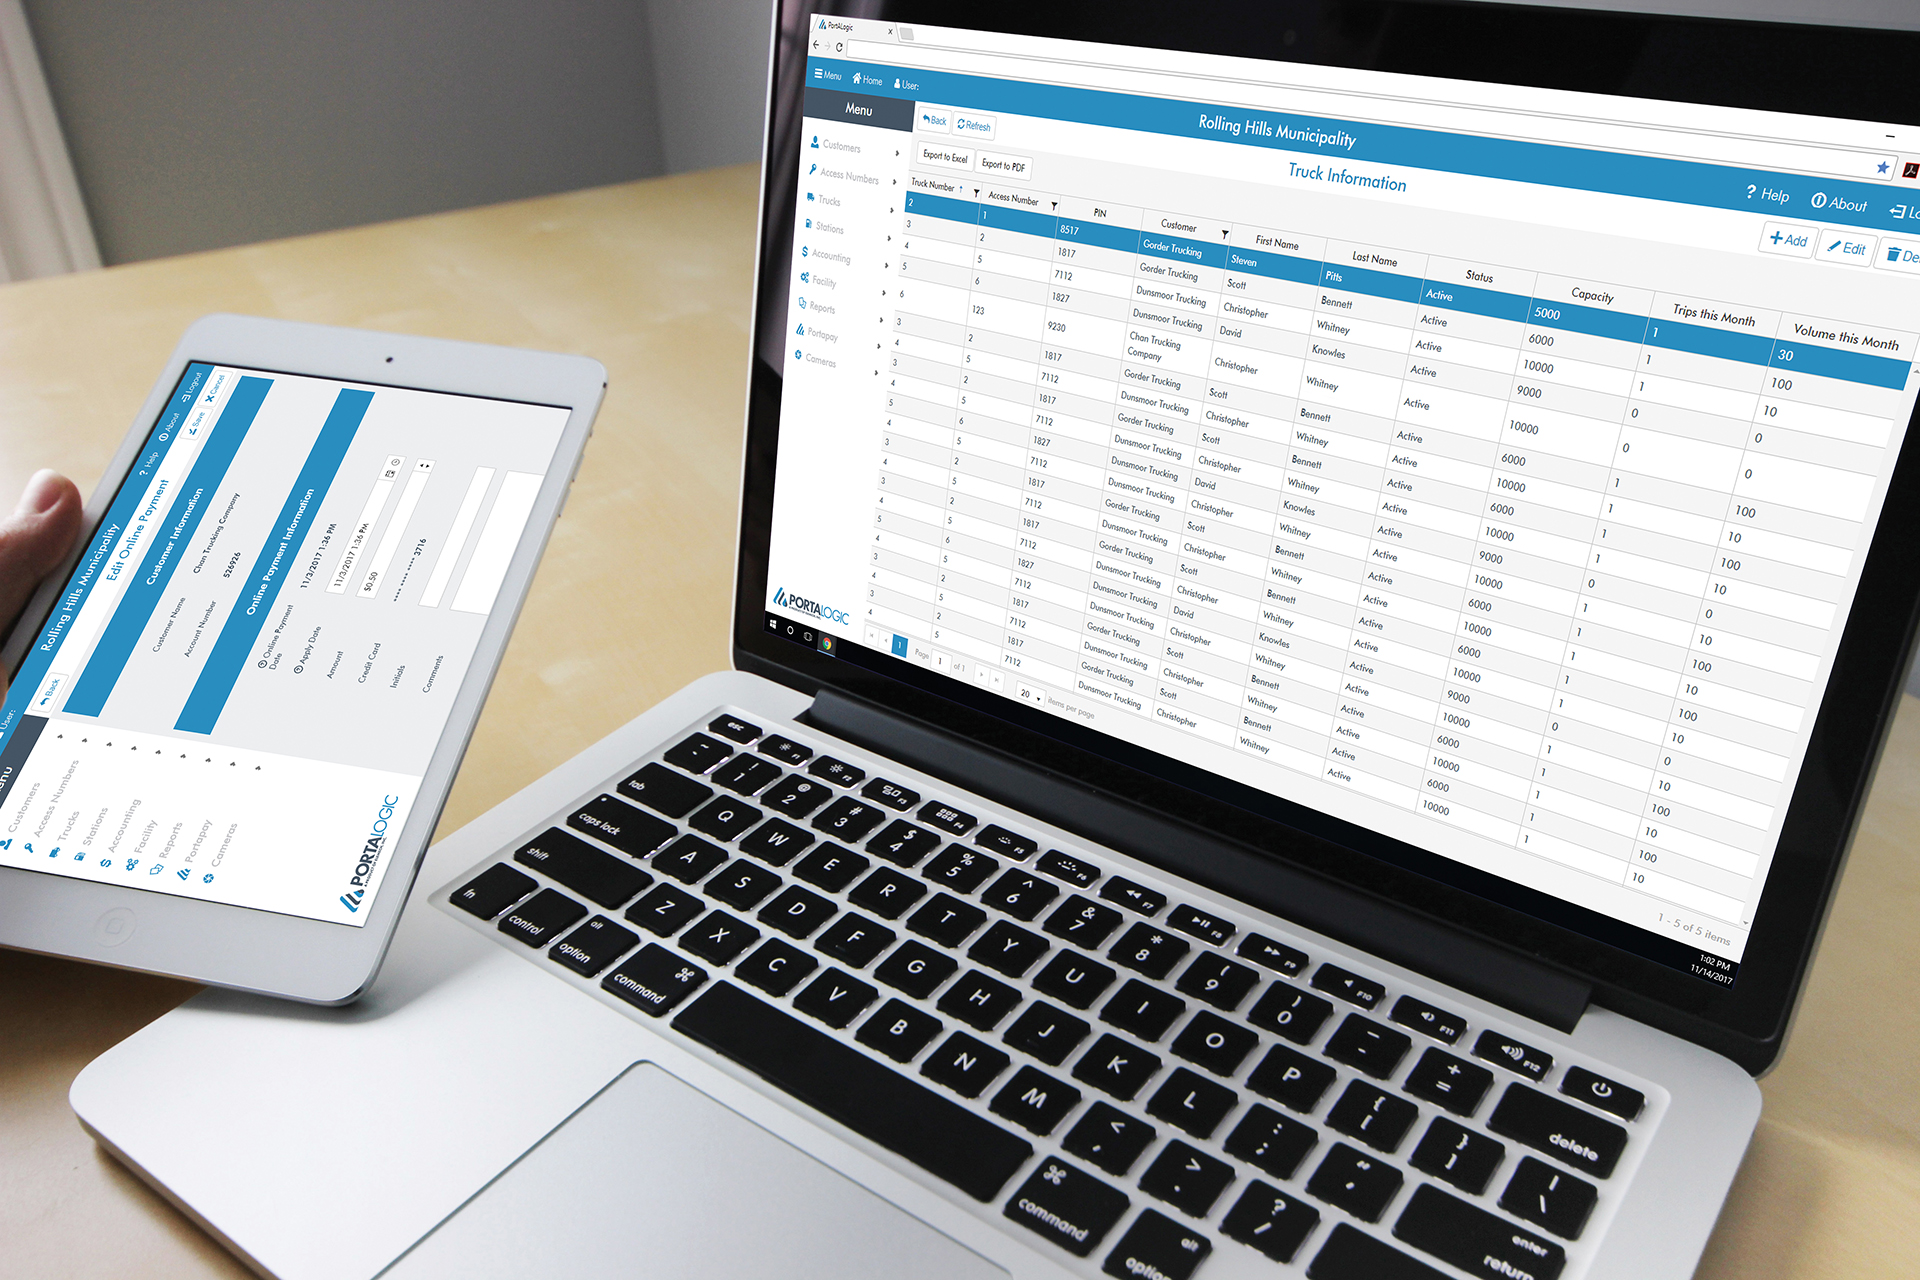 Portalogic management software can be viewed on both PC and tablet.